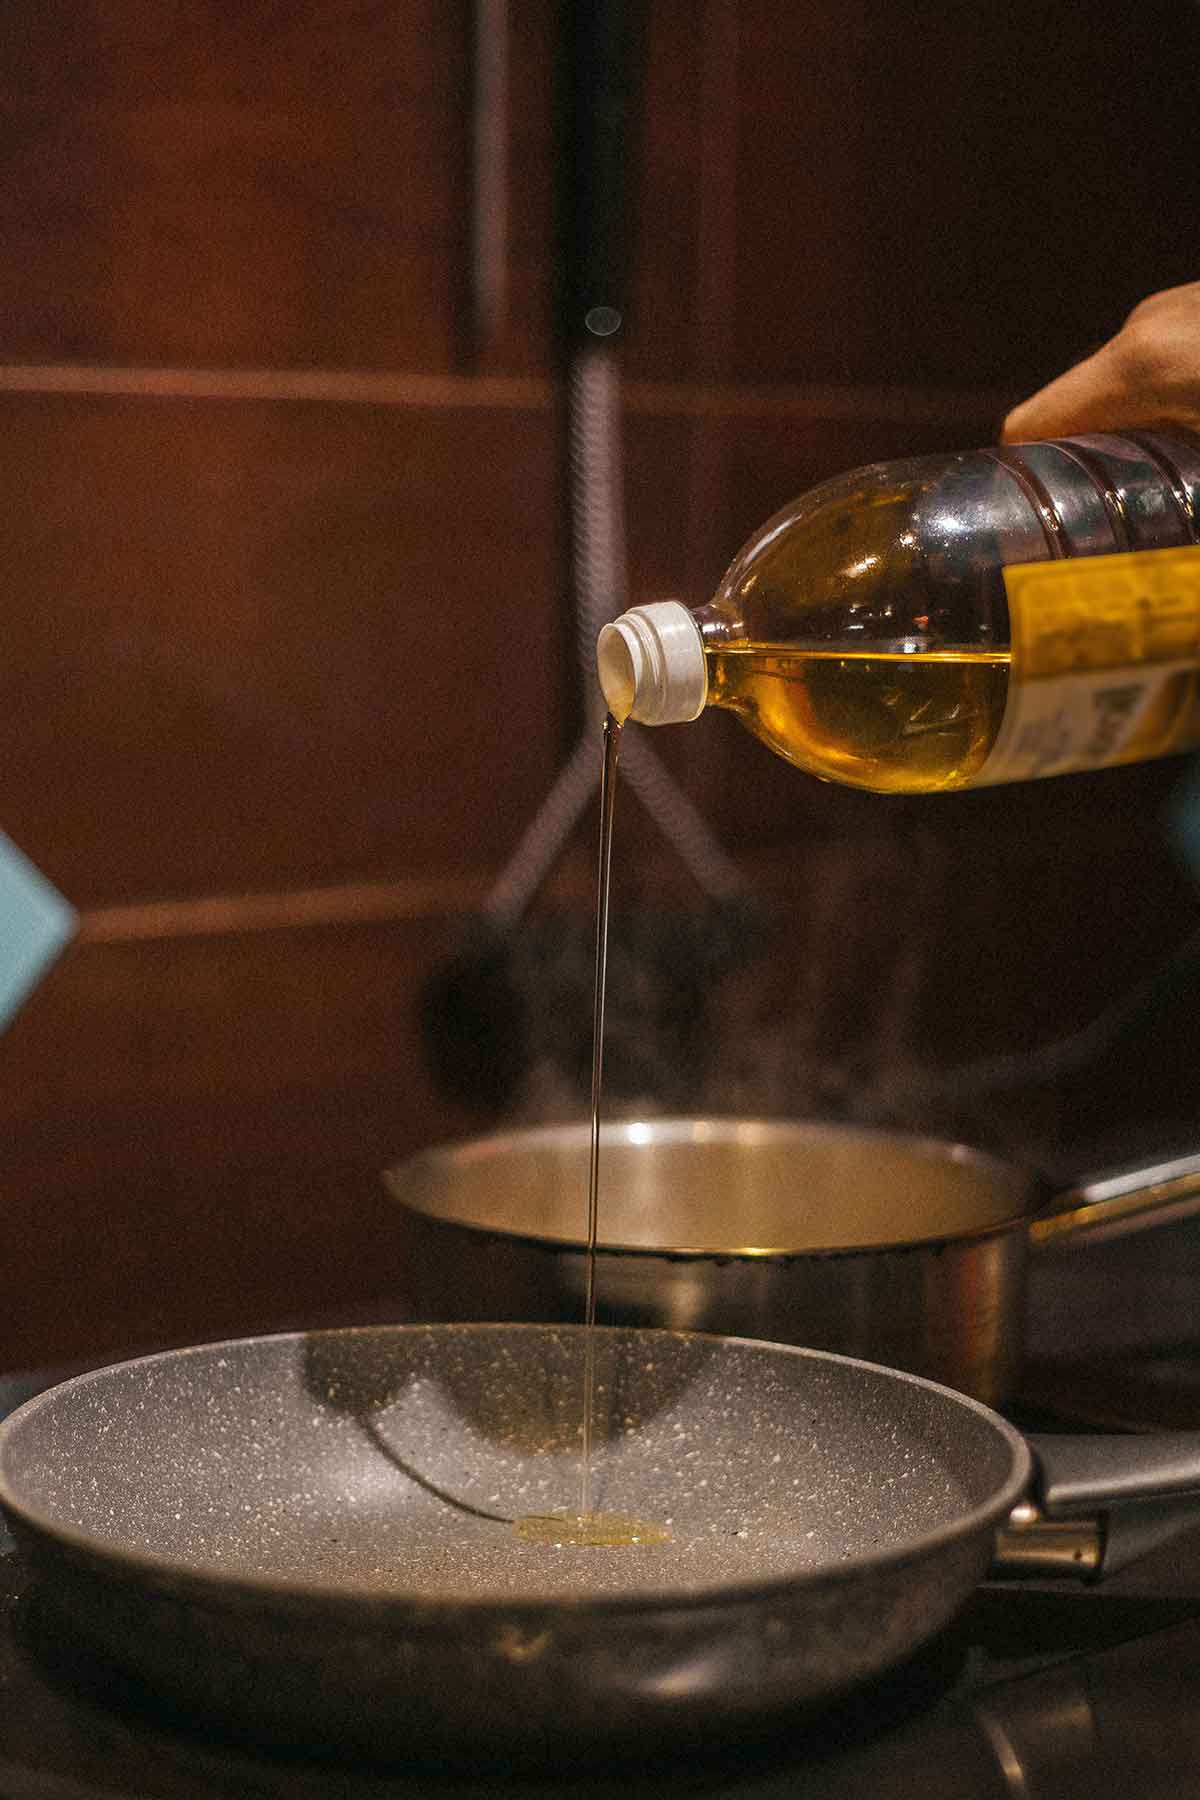 Pouring Oil Into A Pan